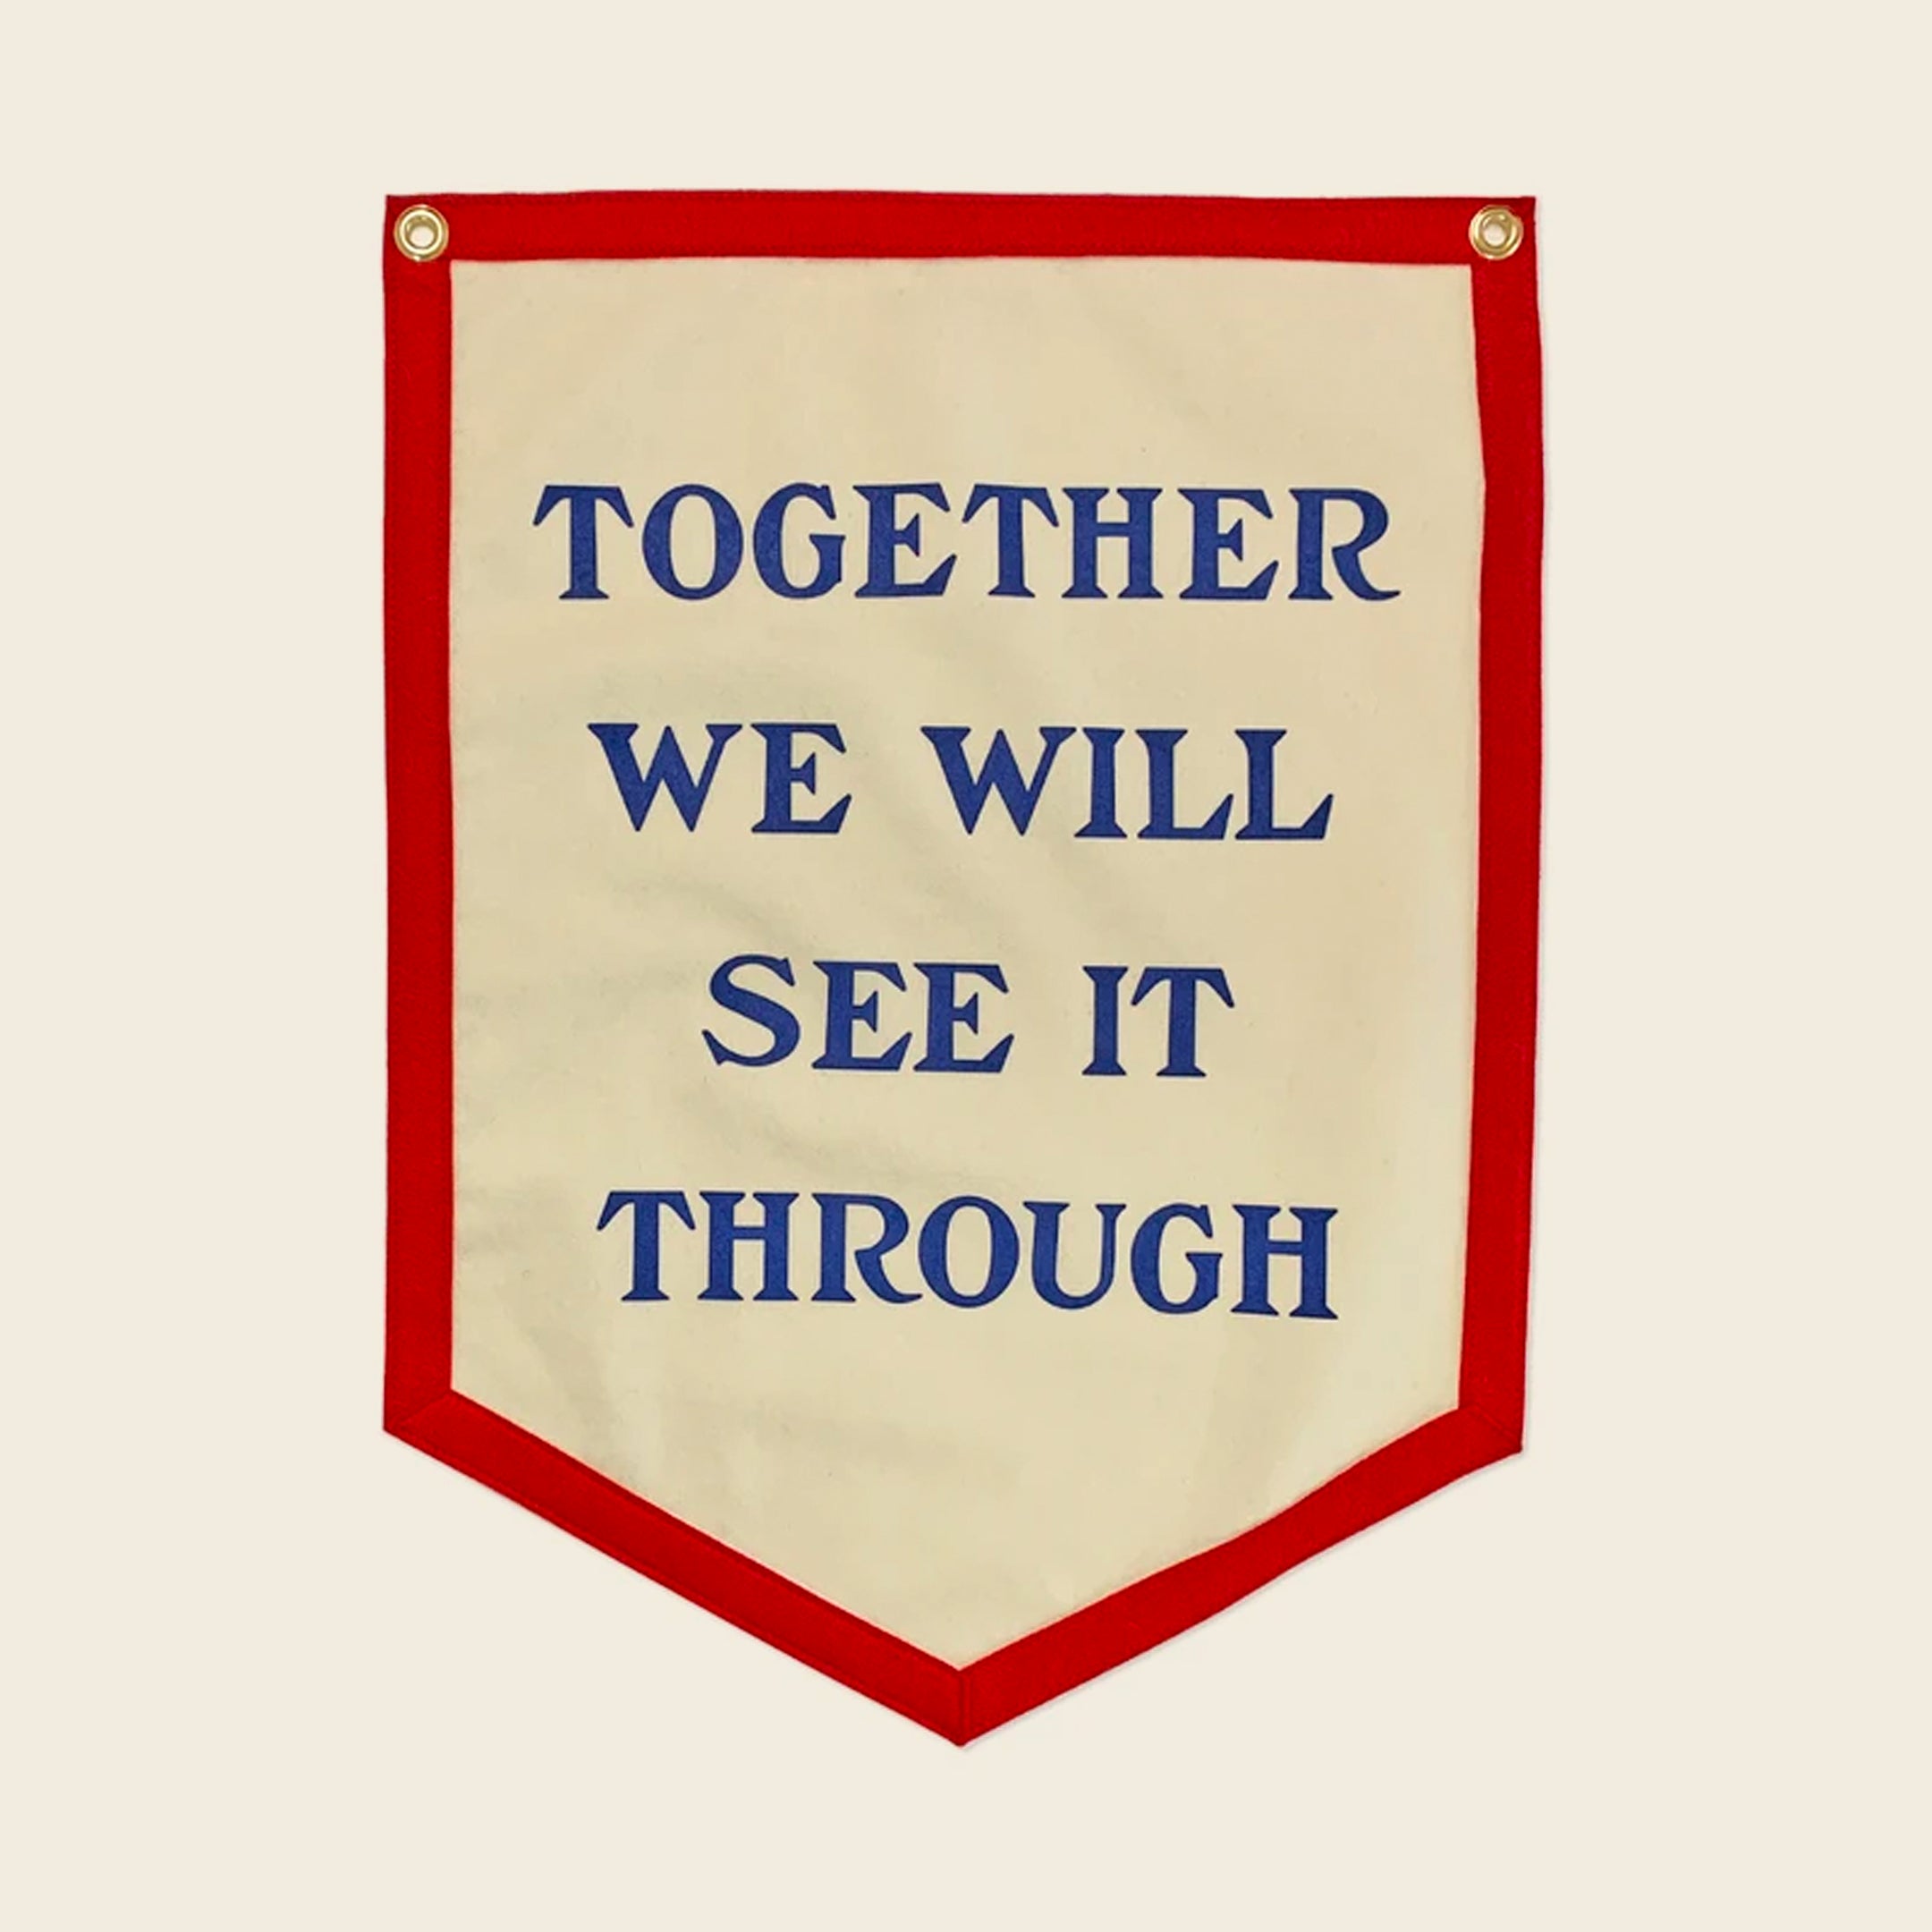 Oxford Pennant - Together We Will See It Through Flag